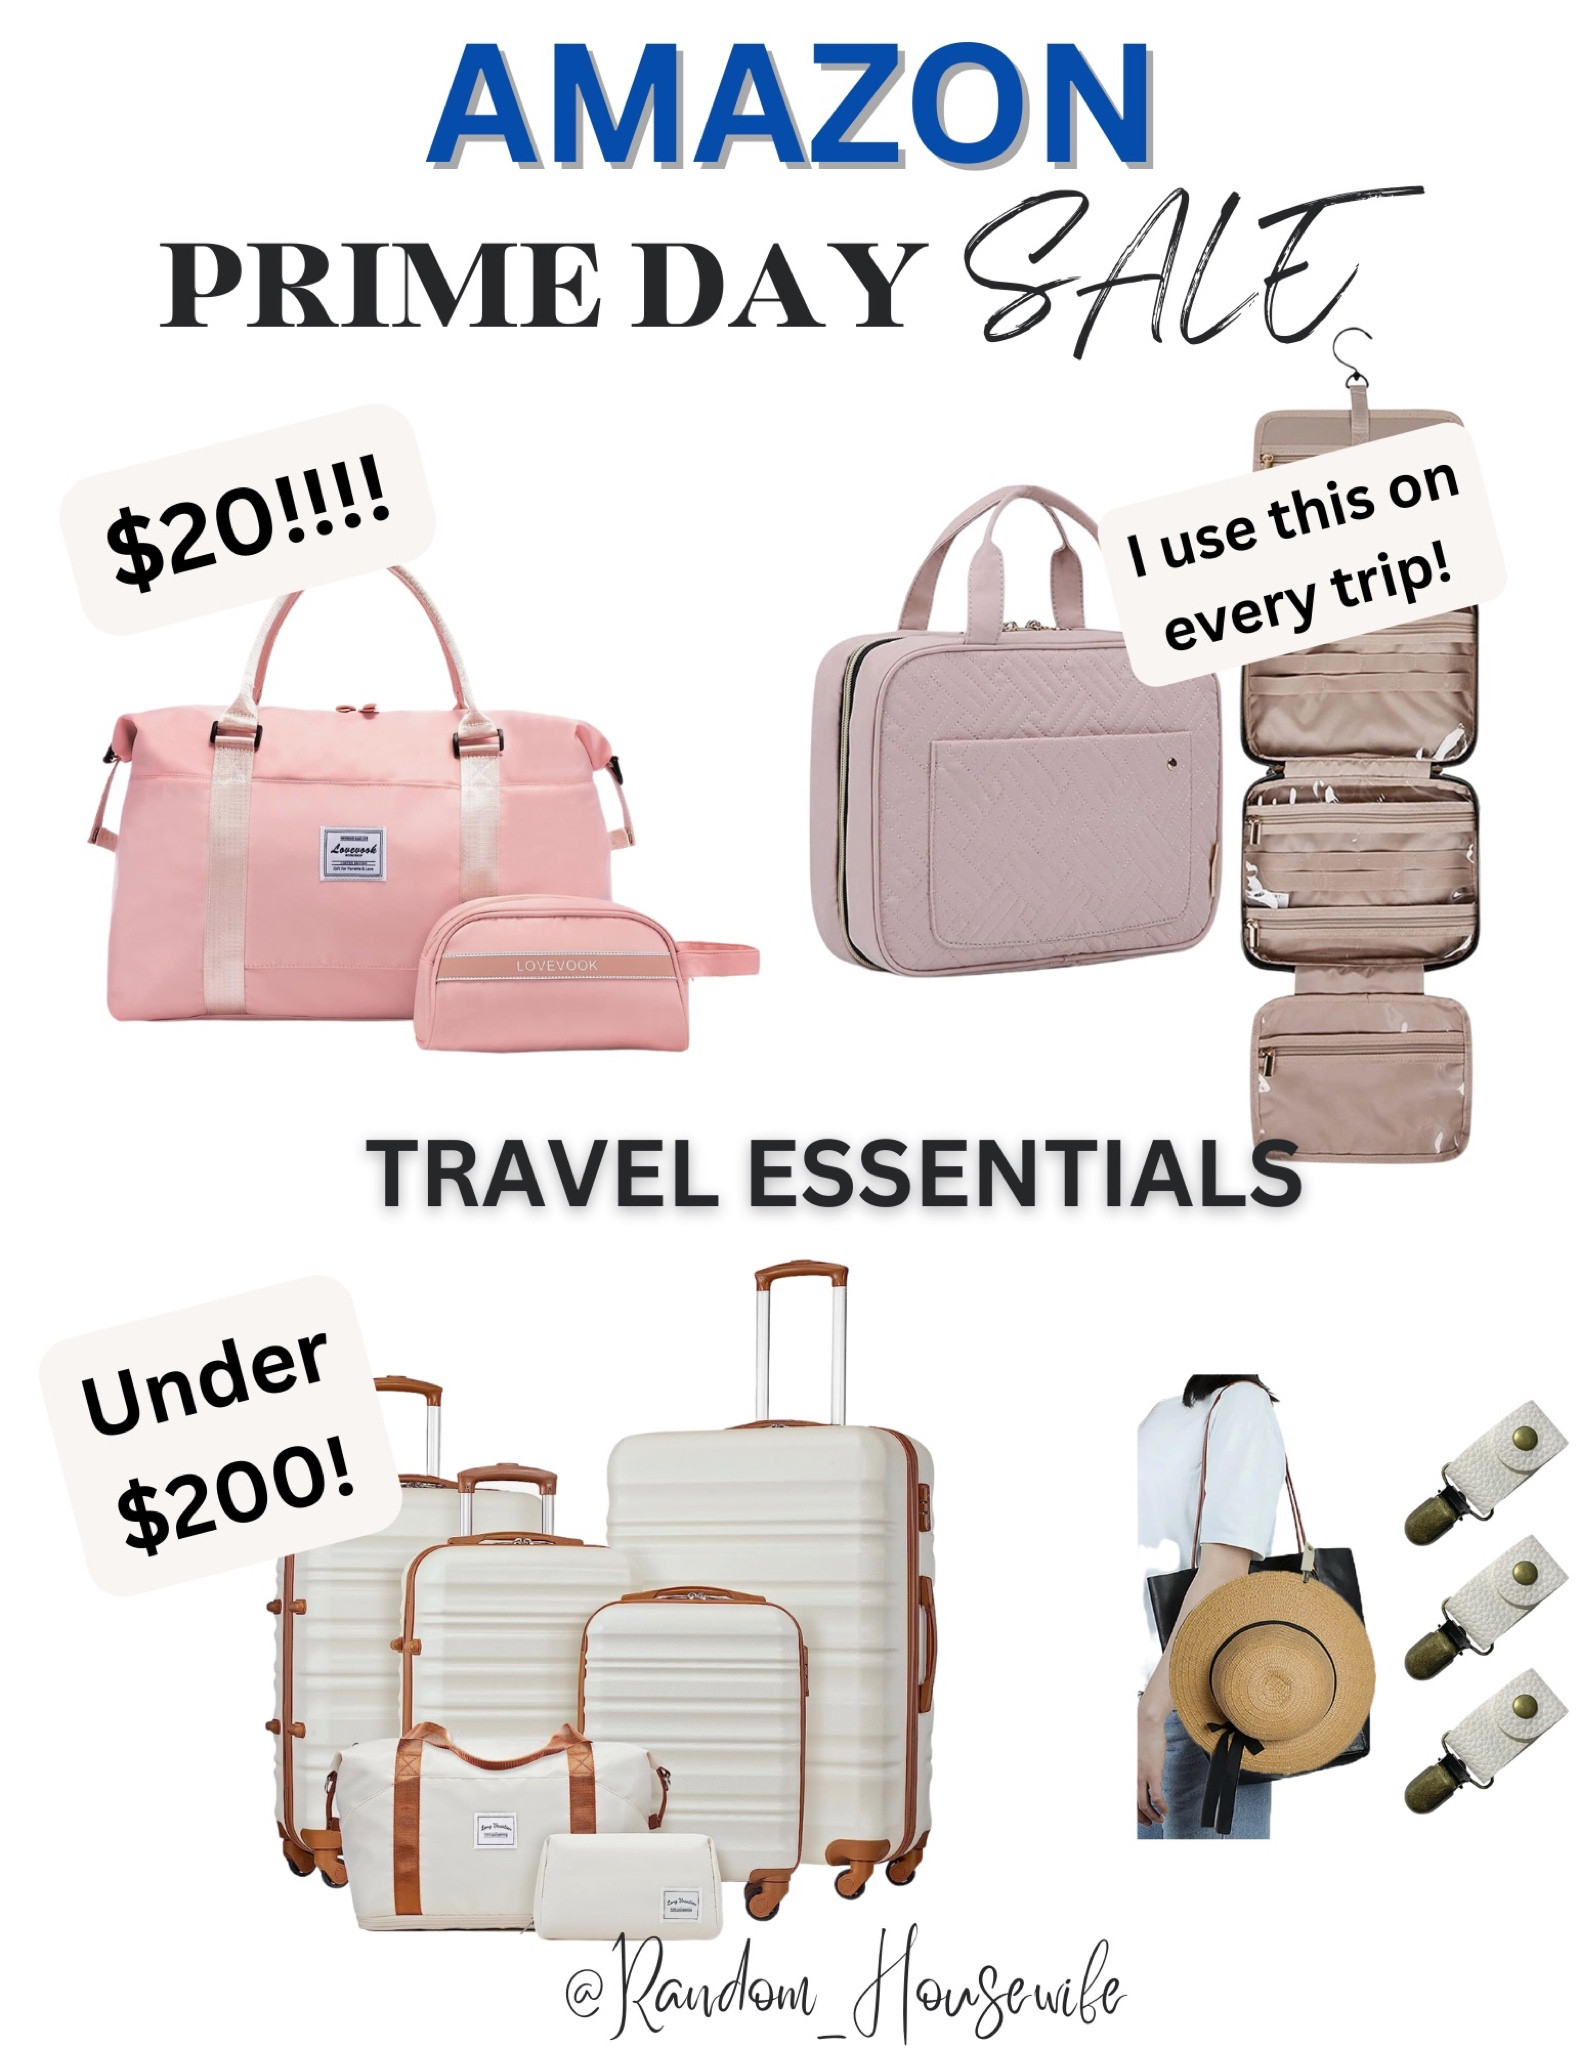 Up To 40% Off on LONG VACATION Luggage Set 4 P